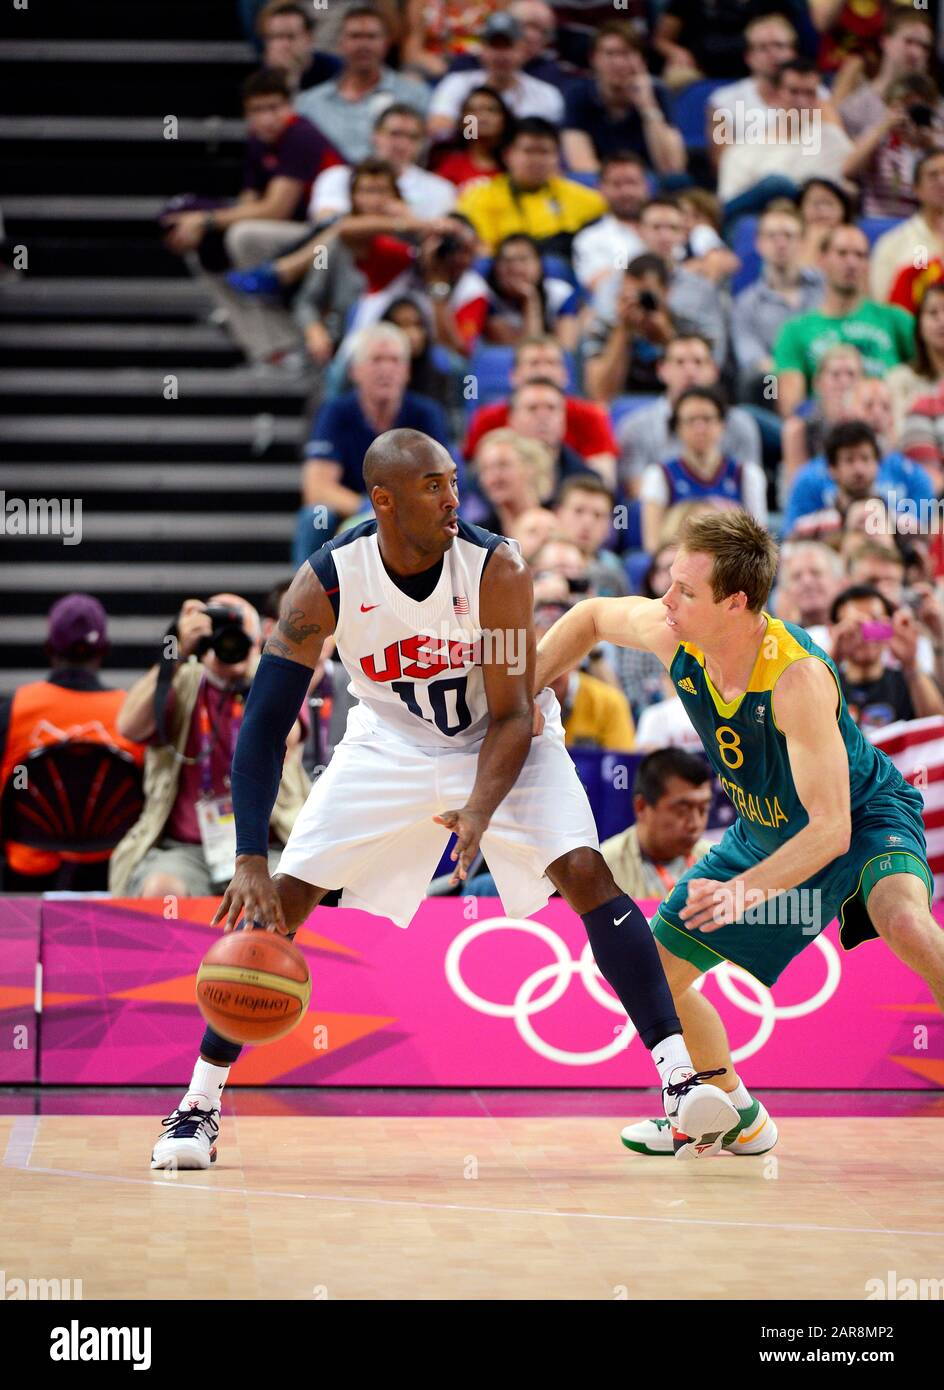 London, UK. 8 August 2012.  File photo of US Basketball star Kobe Bryant competing for Team USA against Australia during the quarterfinals of the basketball tournament at the London Olympics in 2012.  Bryant along with his 13 year old daughter, Gianna was killed in a helicopter crash in Calabasas, California on Sunday, January 26, 2019 Stock Photo